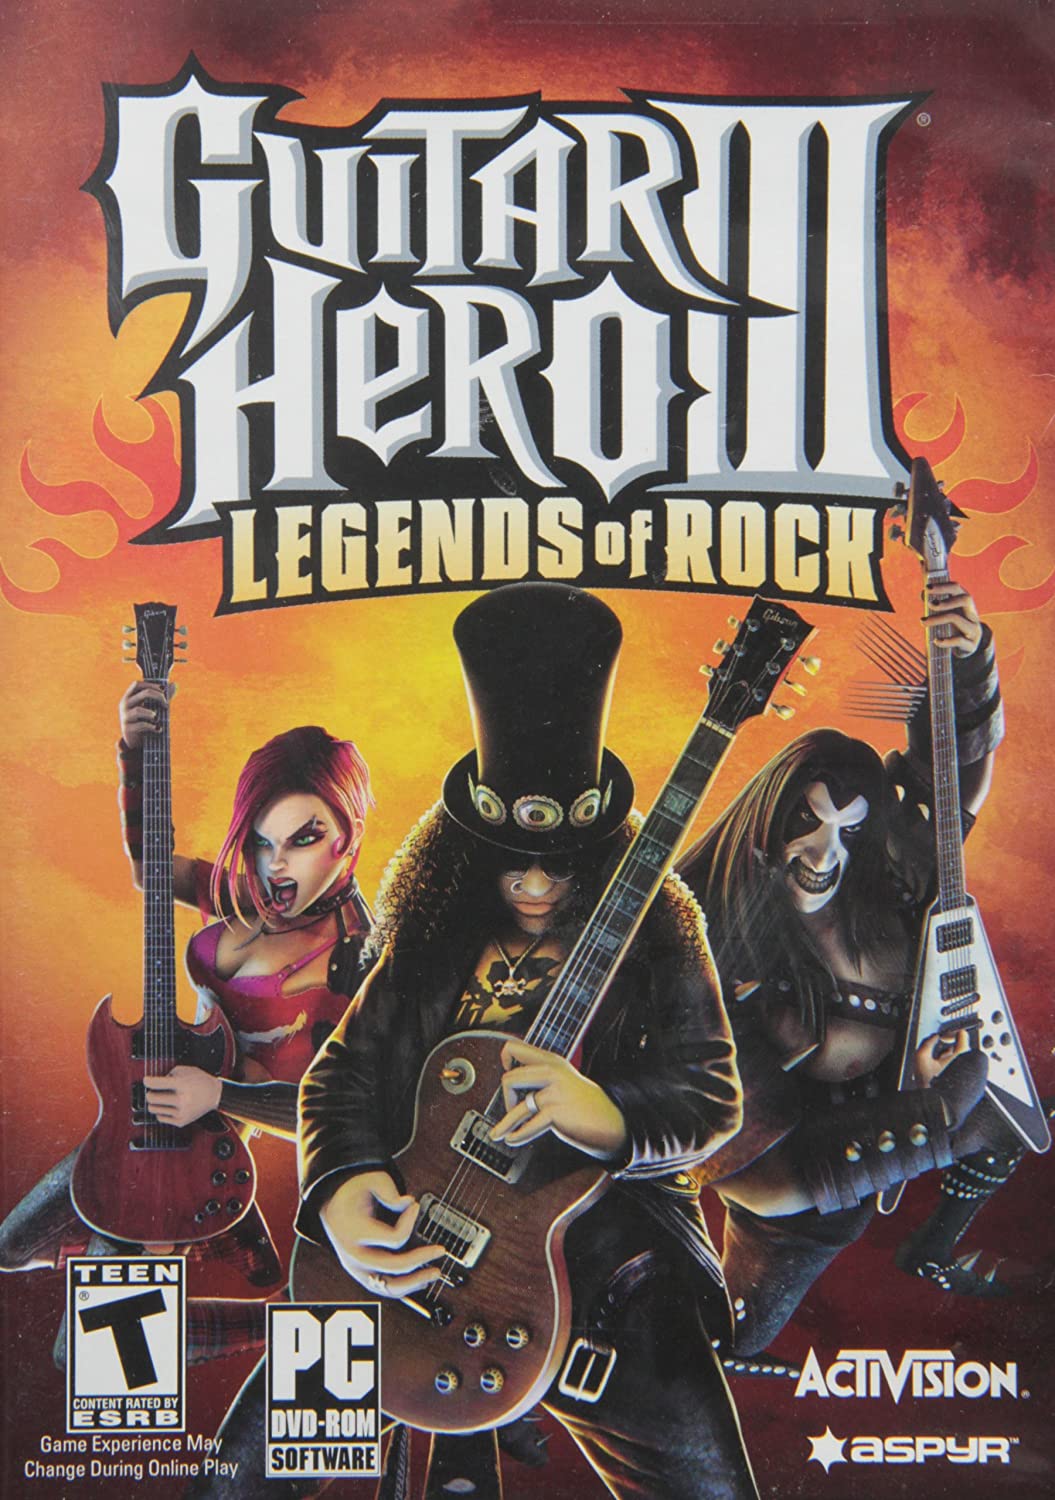 Play Guitar Hero Mobile: Music Game Online for Free on PC & Mobile